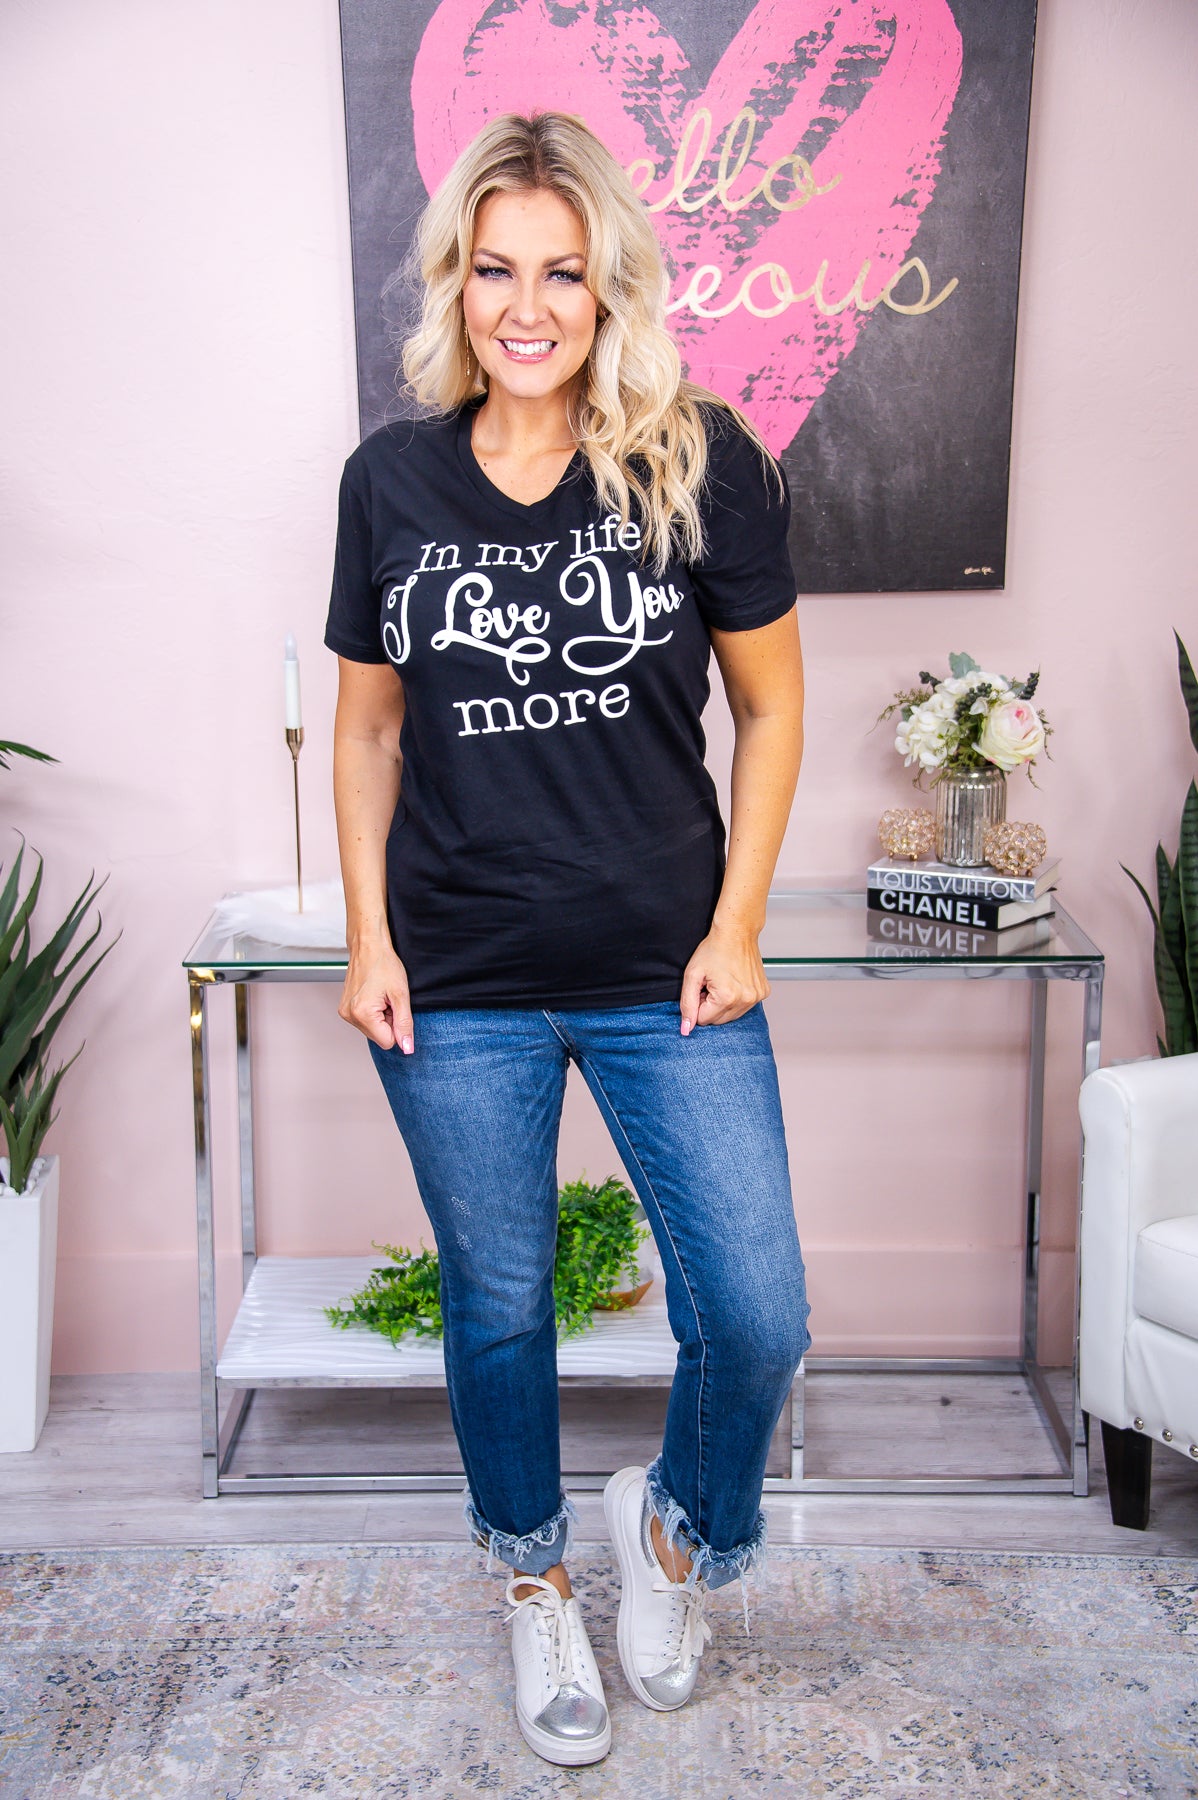 In My Life I Love You More Black V Neck Graphic Tee - A2887BK